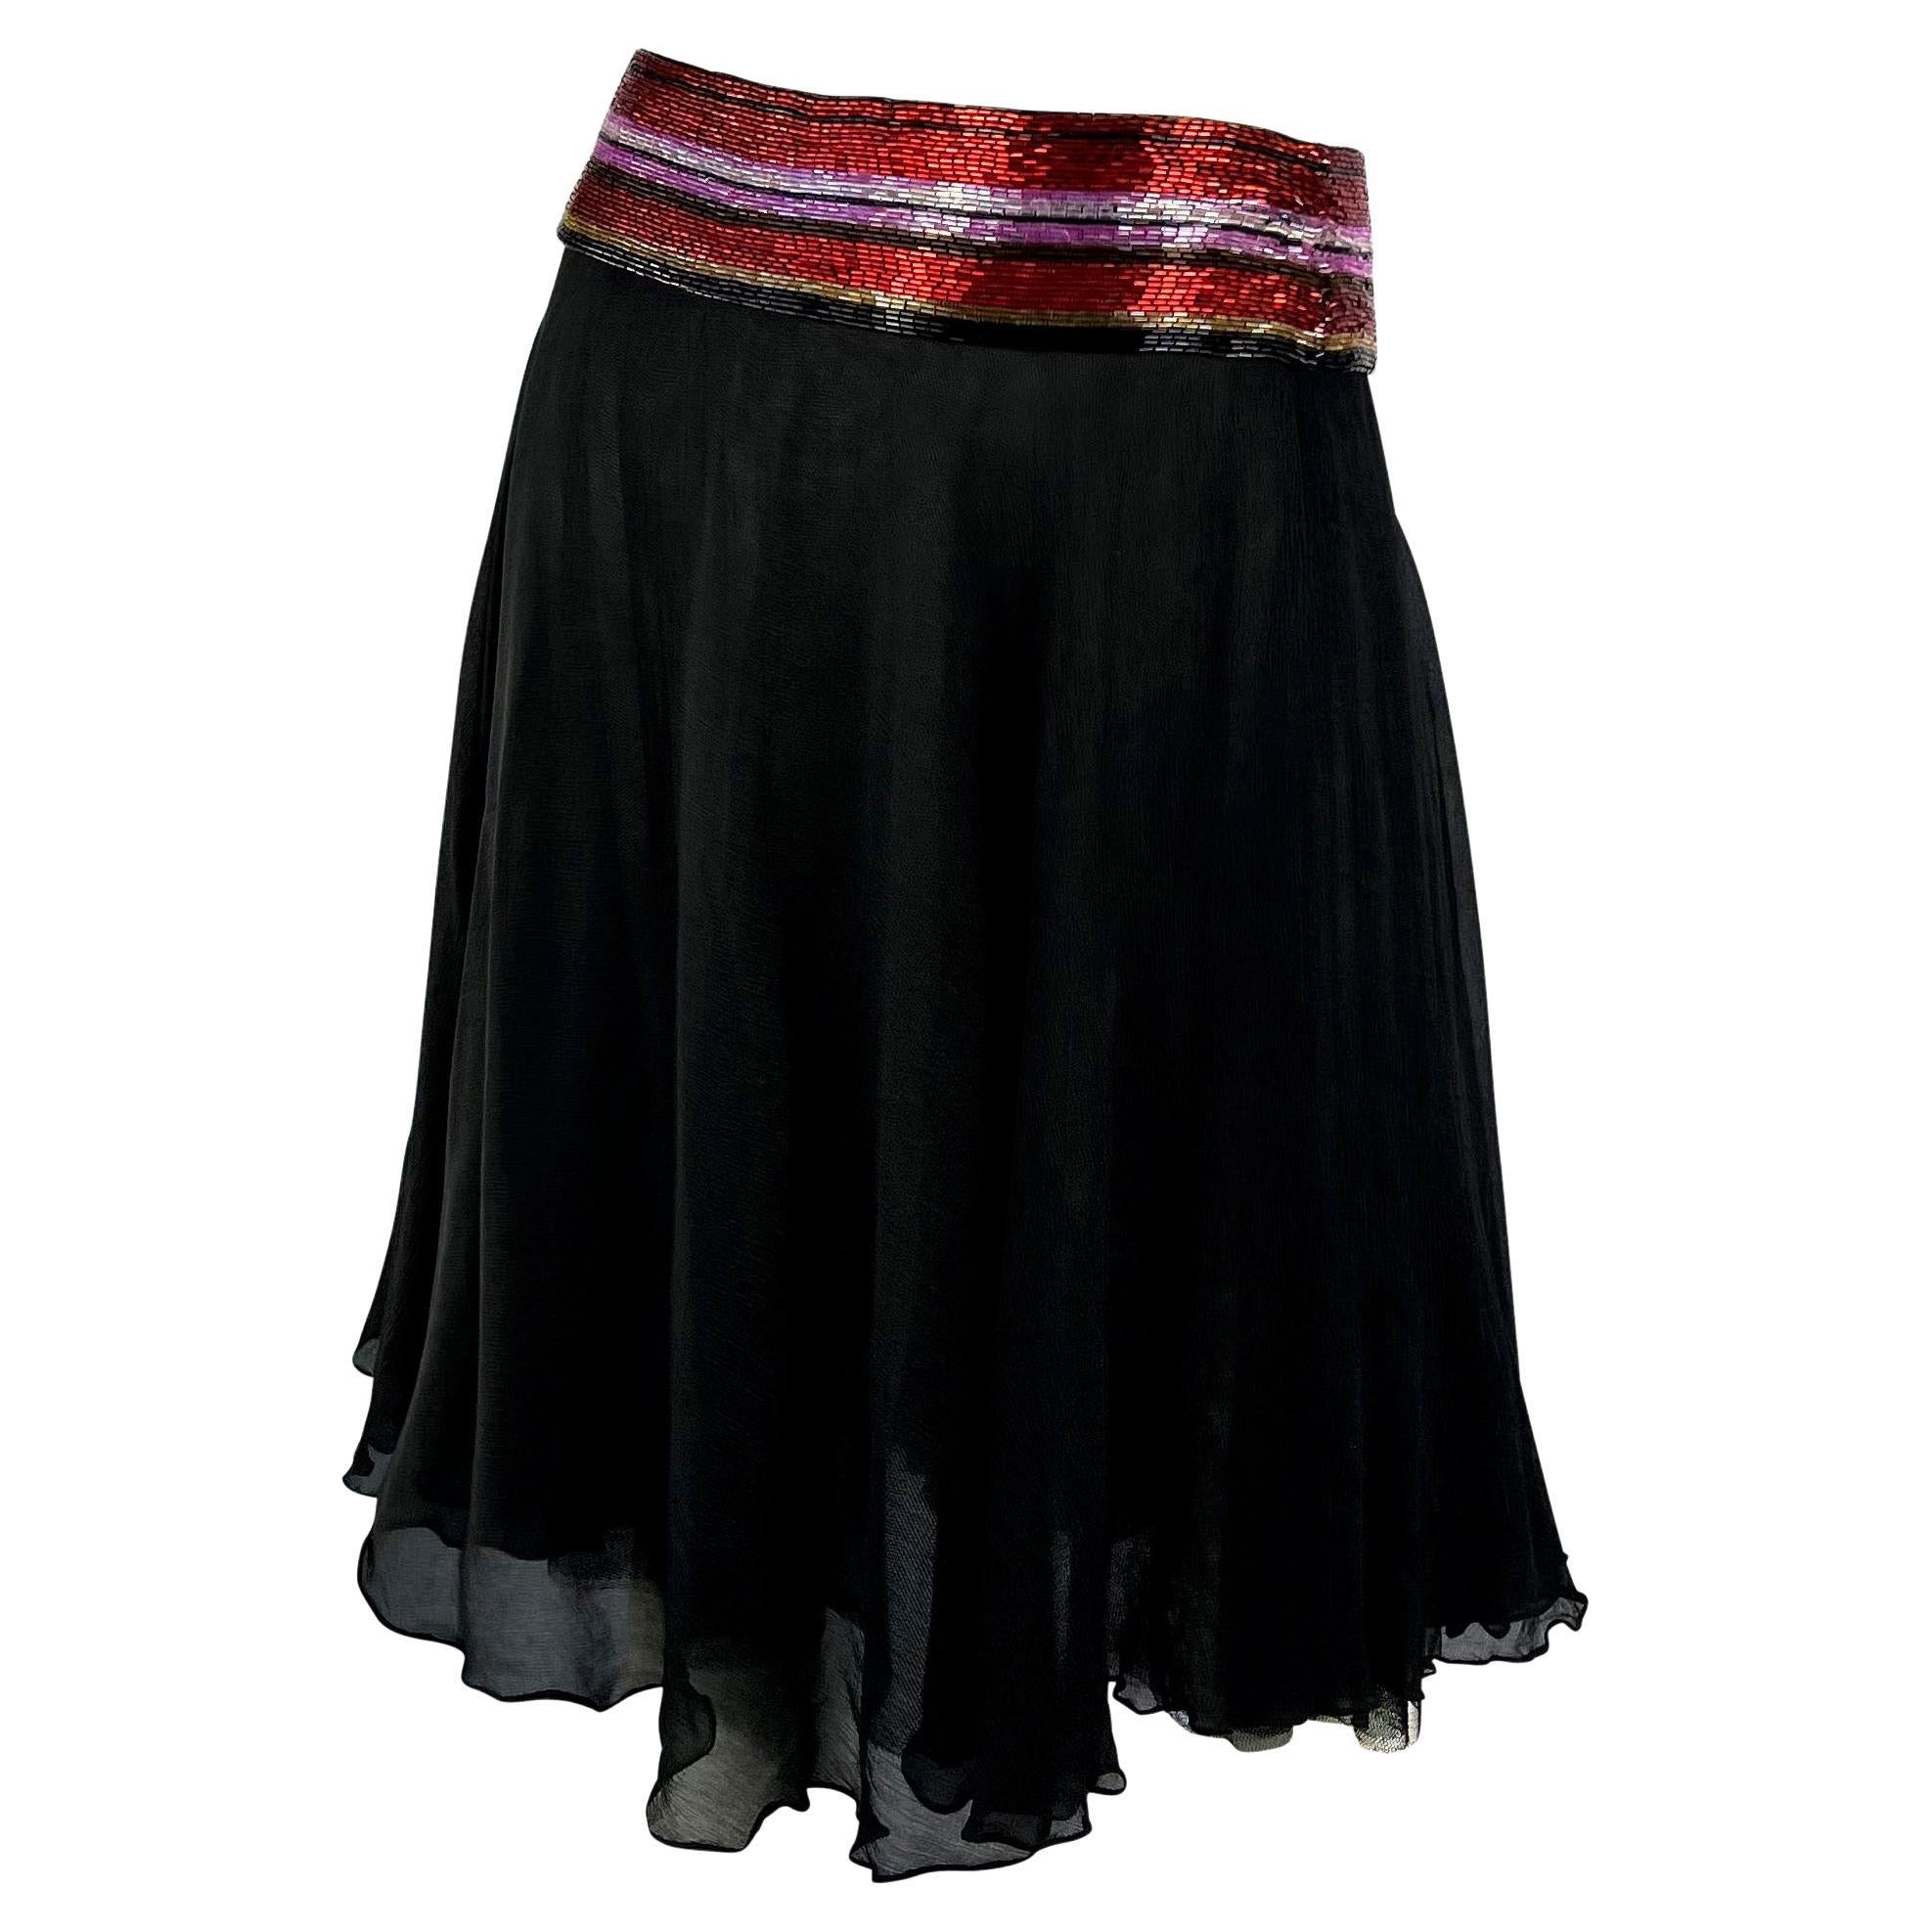 S/S 2000 Dolce & Gabbana Beaded Black Silk Chiffon Red Stripe Waistband Skirt In Good Condition For Sale In West Hollywood, CA